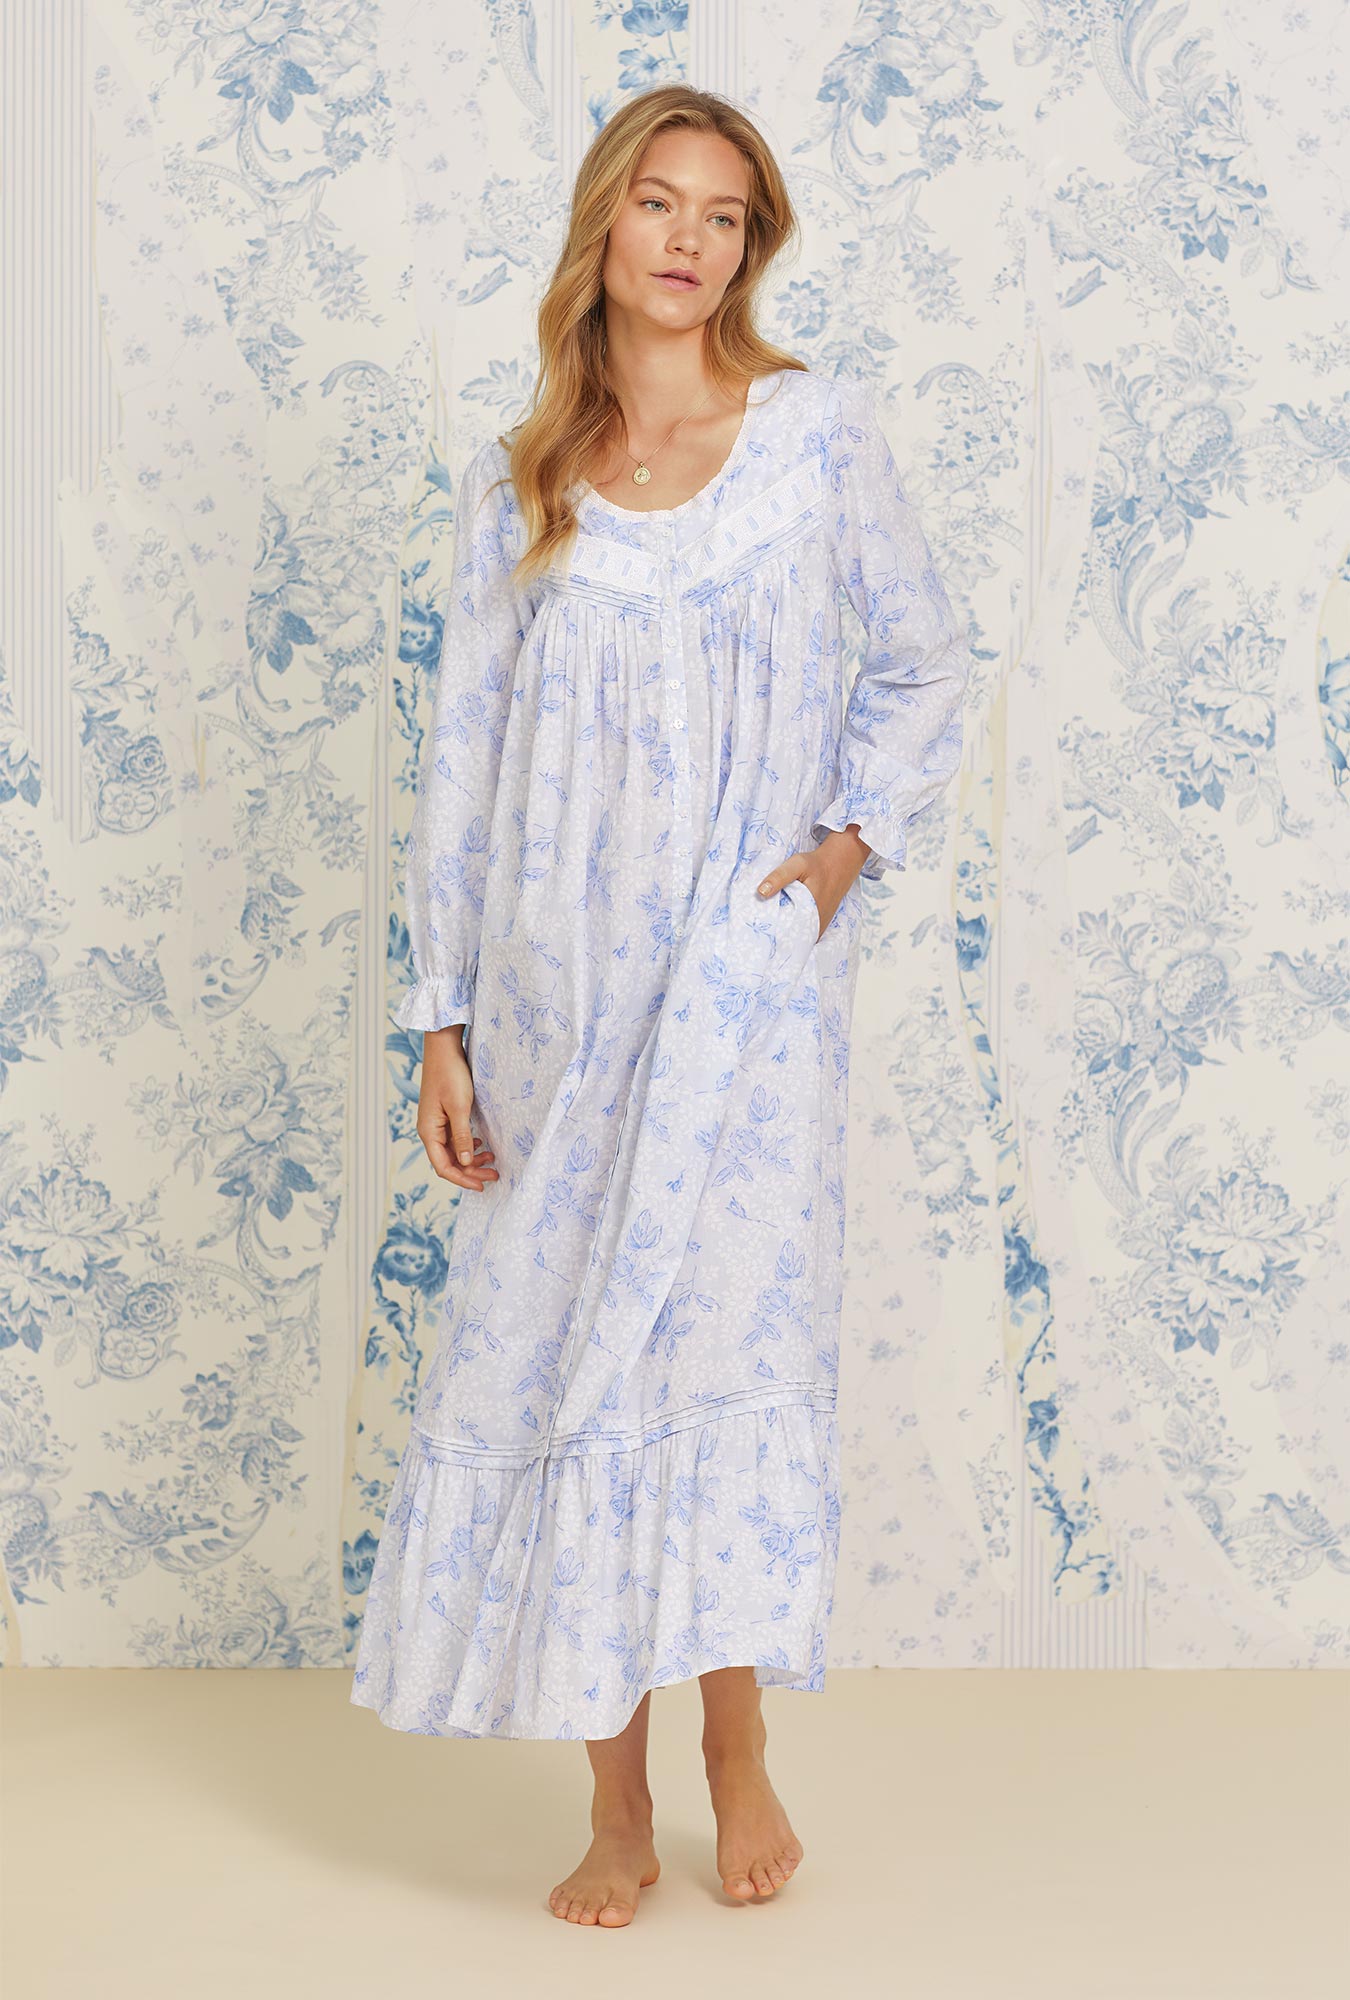 A lady wearing Laurel Canyon Roses Button Front Cotton Robe